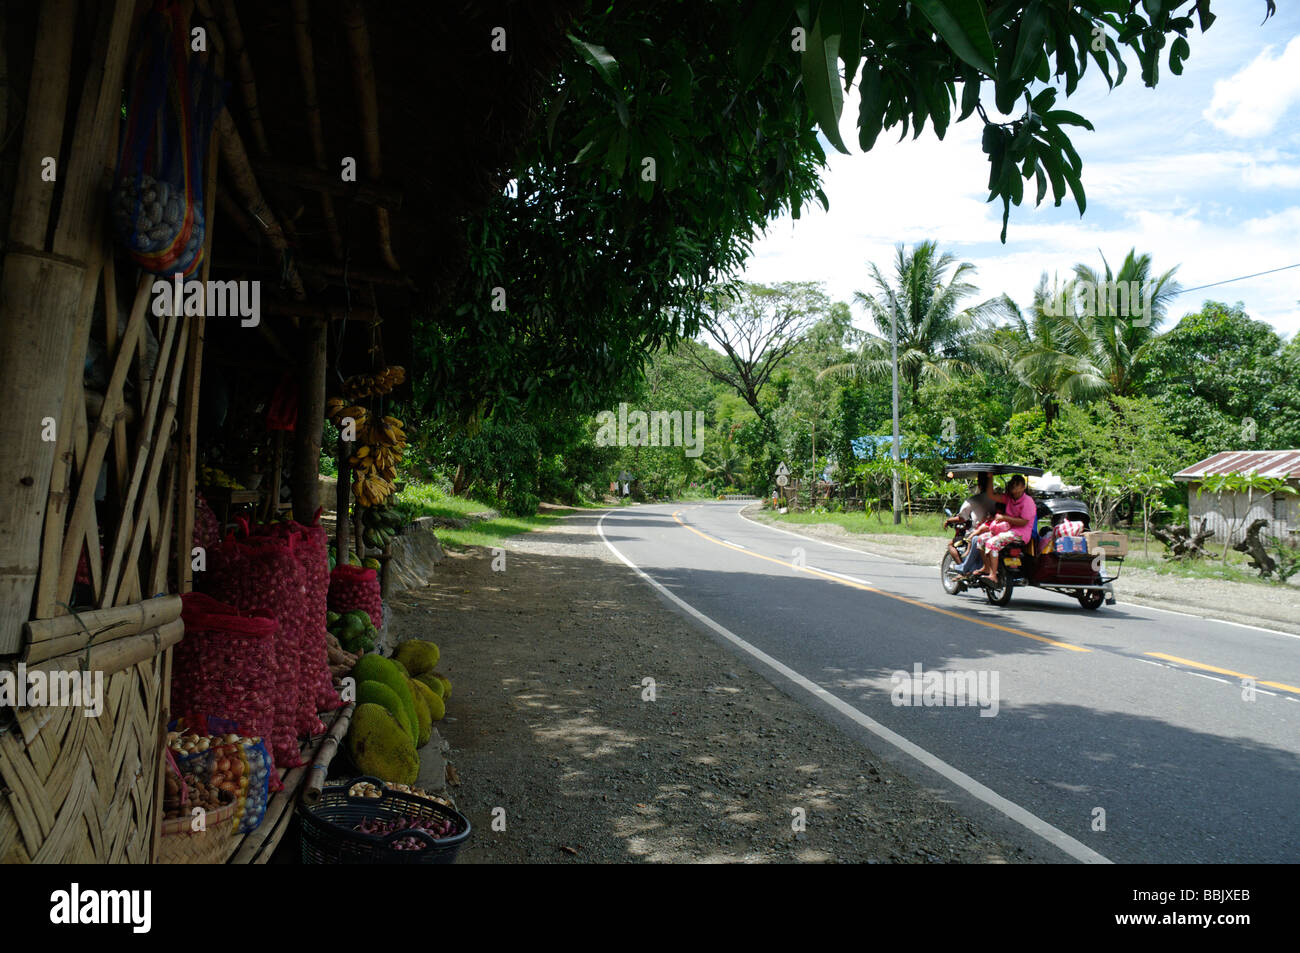 A tricycle passes a roadside fruit and vegetable stall, Nueva Ecija, North Luzon, Philippines Stock Photo